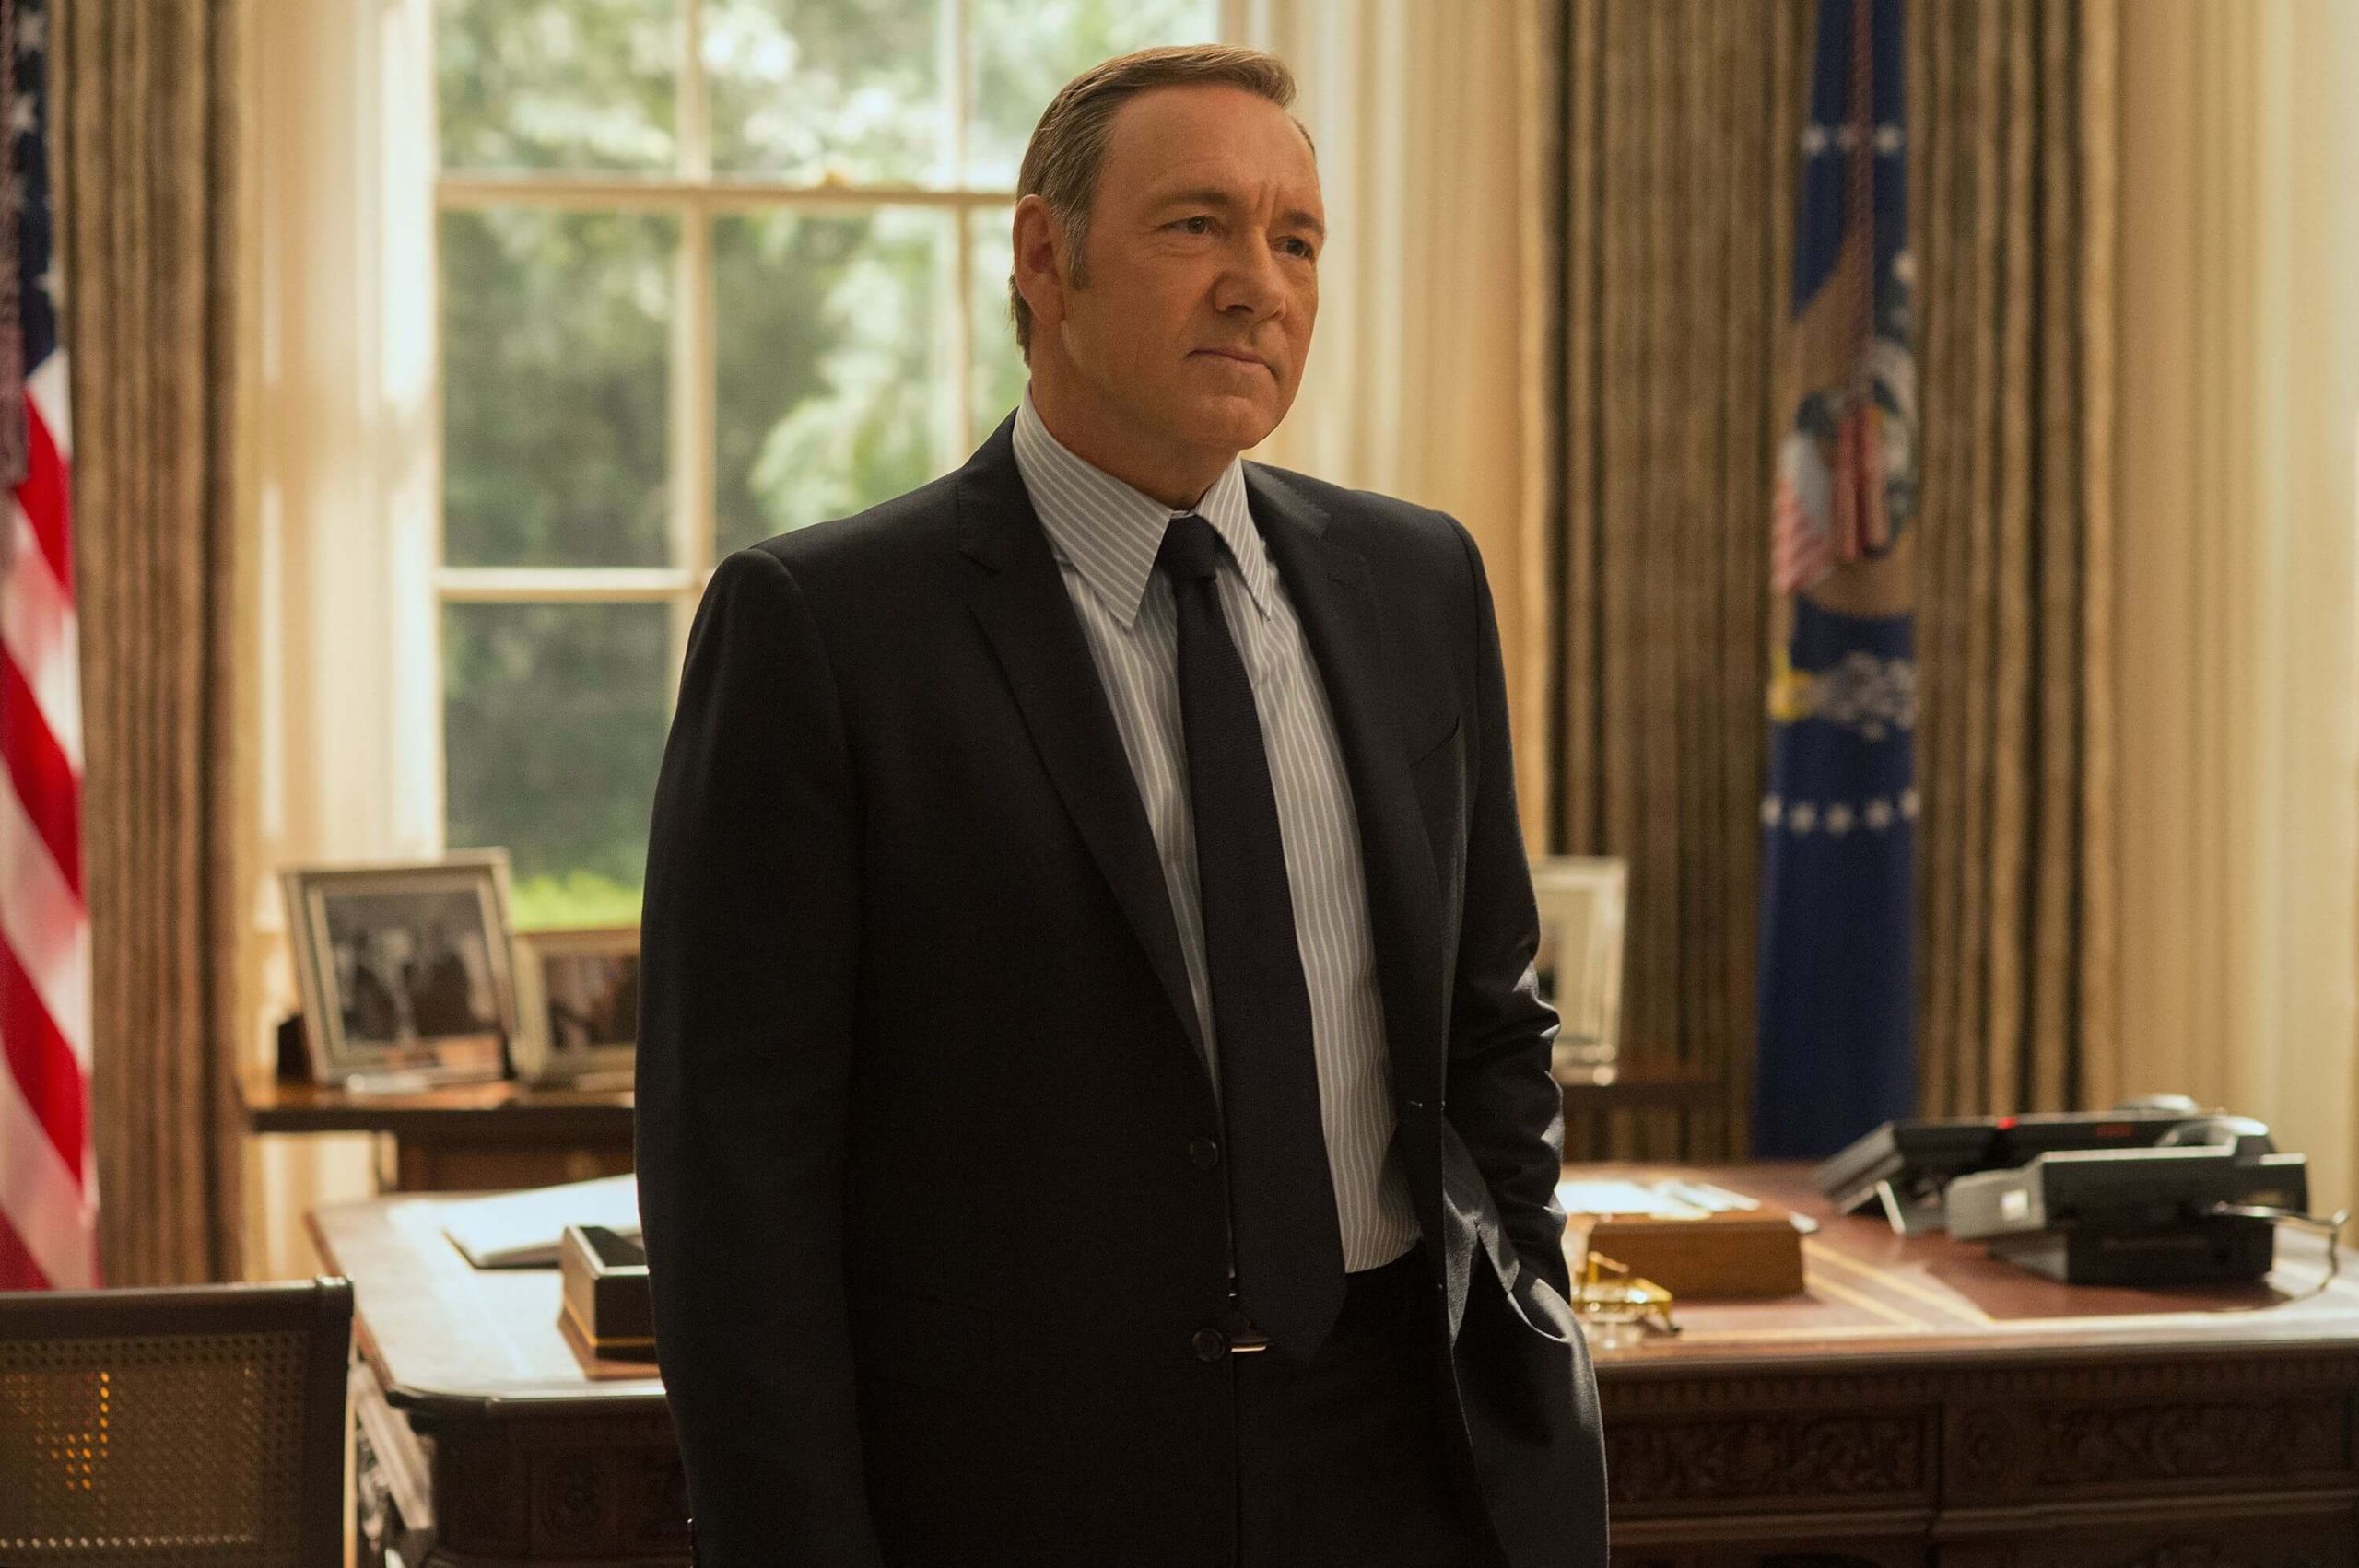 Spacey in Netflix's House of Cards.